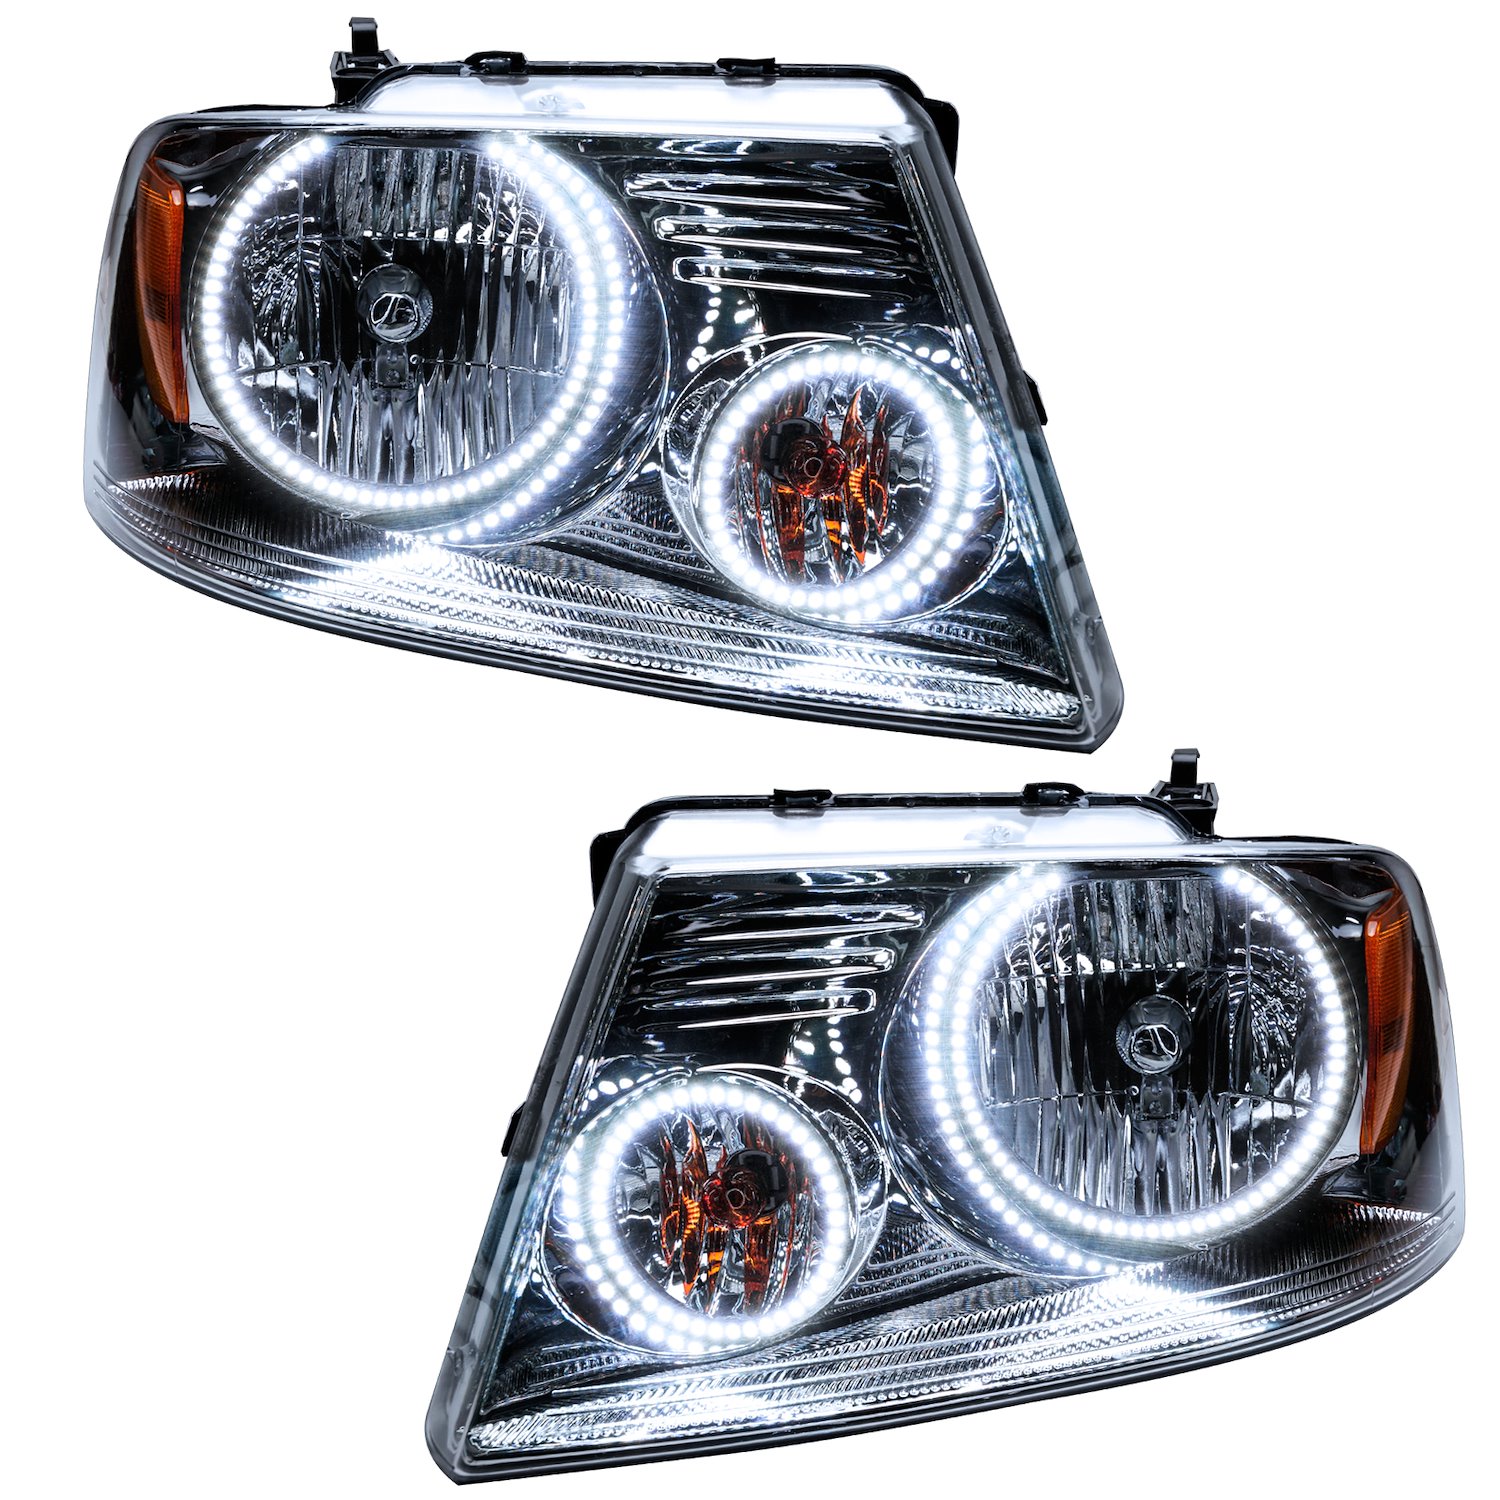 LED HALO Headlight Assembly Comes with preinstalled white LED Halos